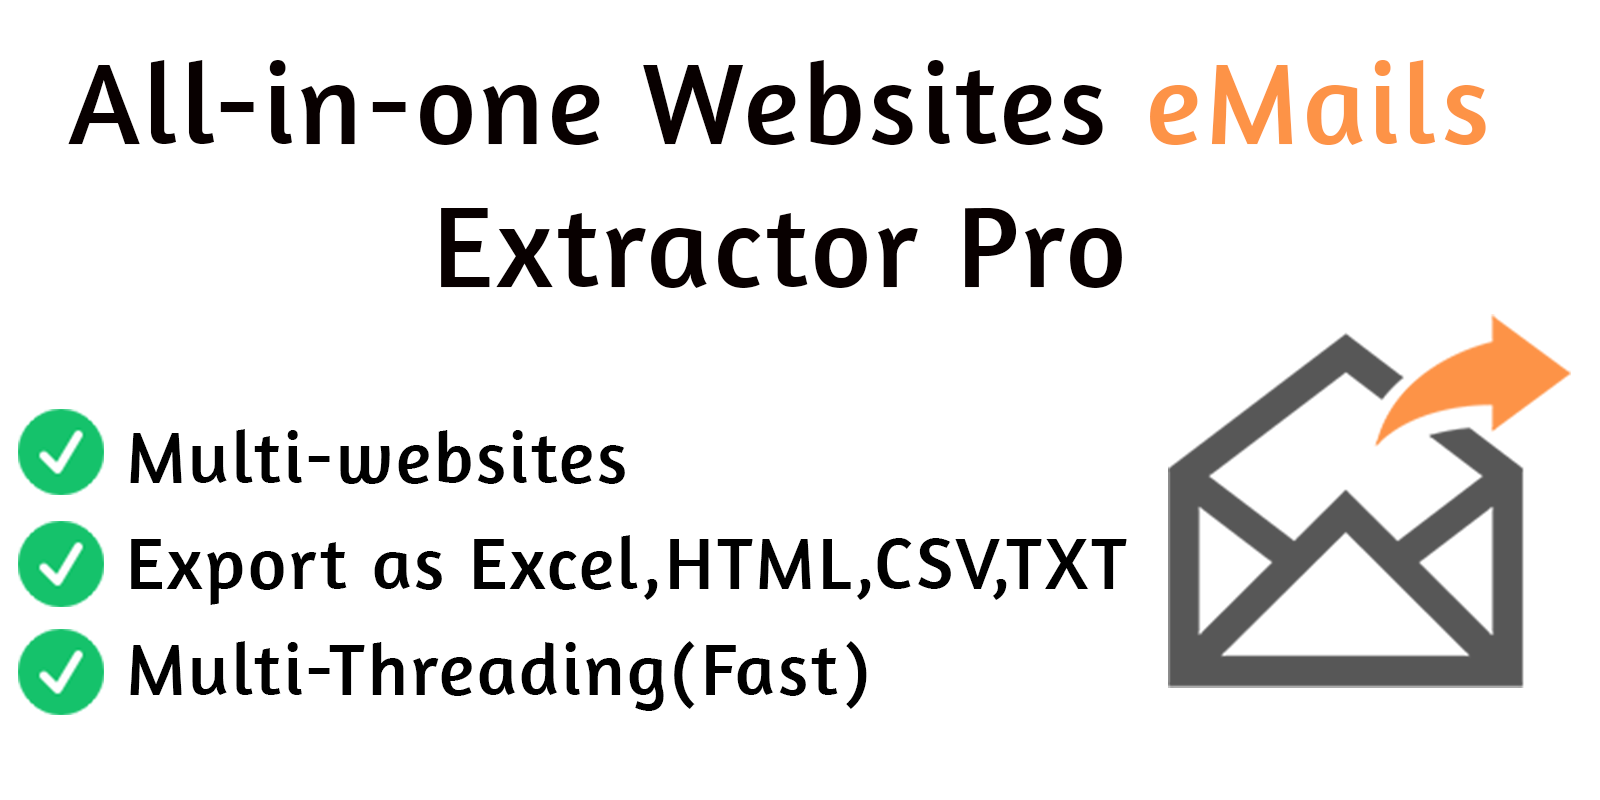 All-in-one Websites eMails Extractor Pro